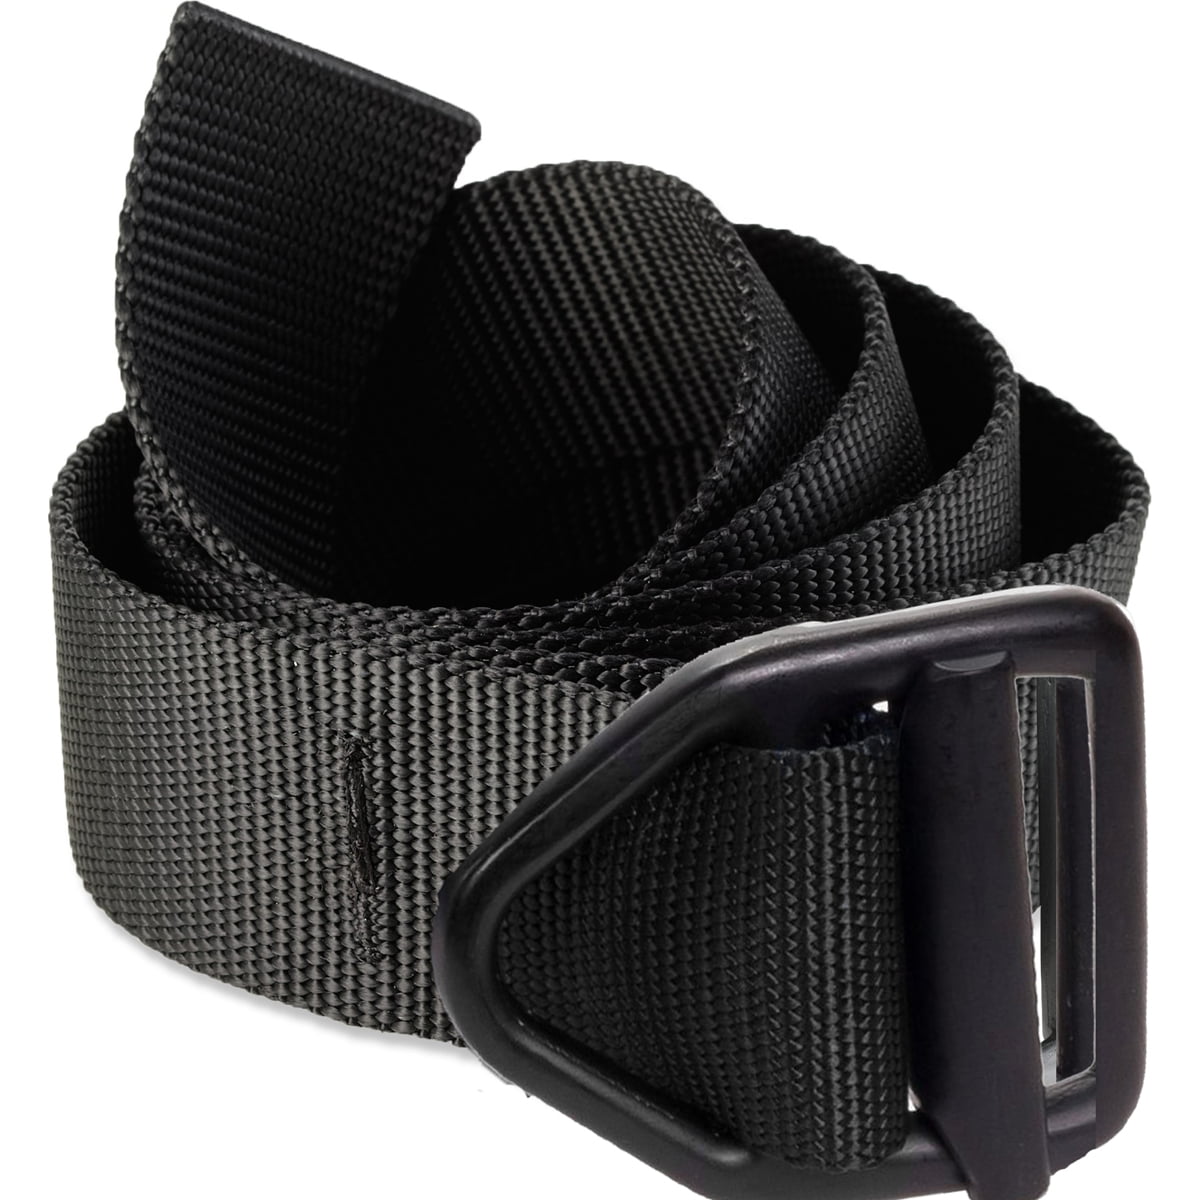 MILITARY CARGO CHUTE TIE DOWN LASHING STRAP TACTICAL WEB BELT UNIVERSAL SIZE 